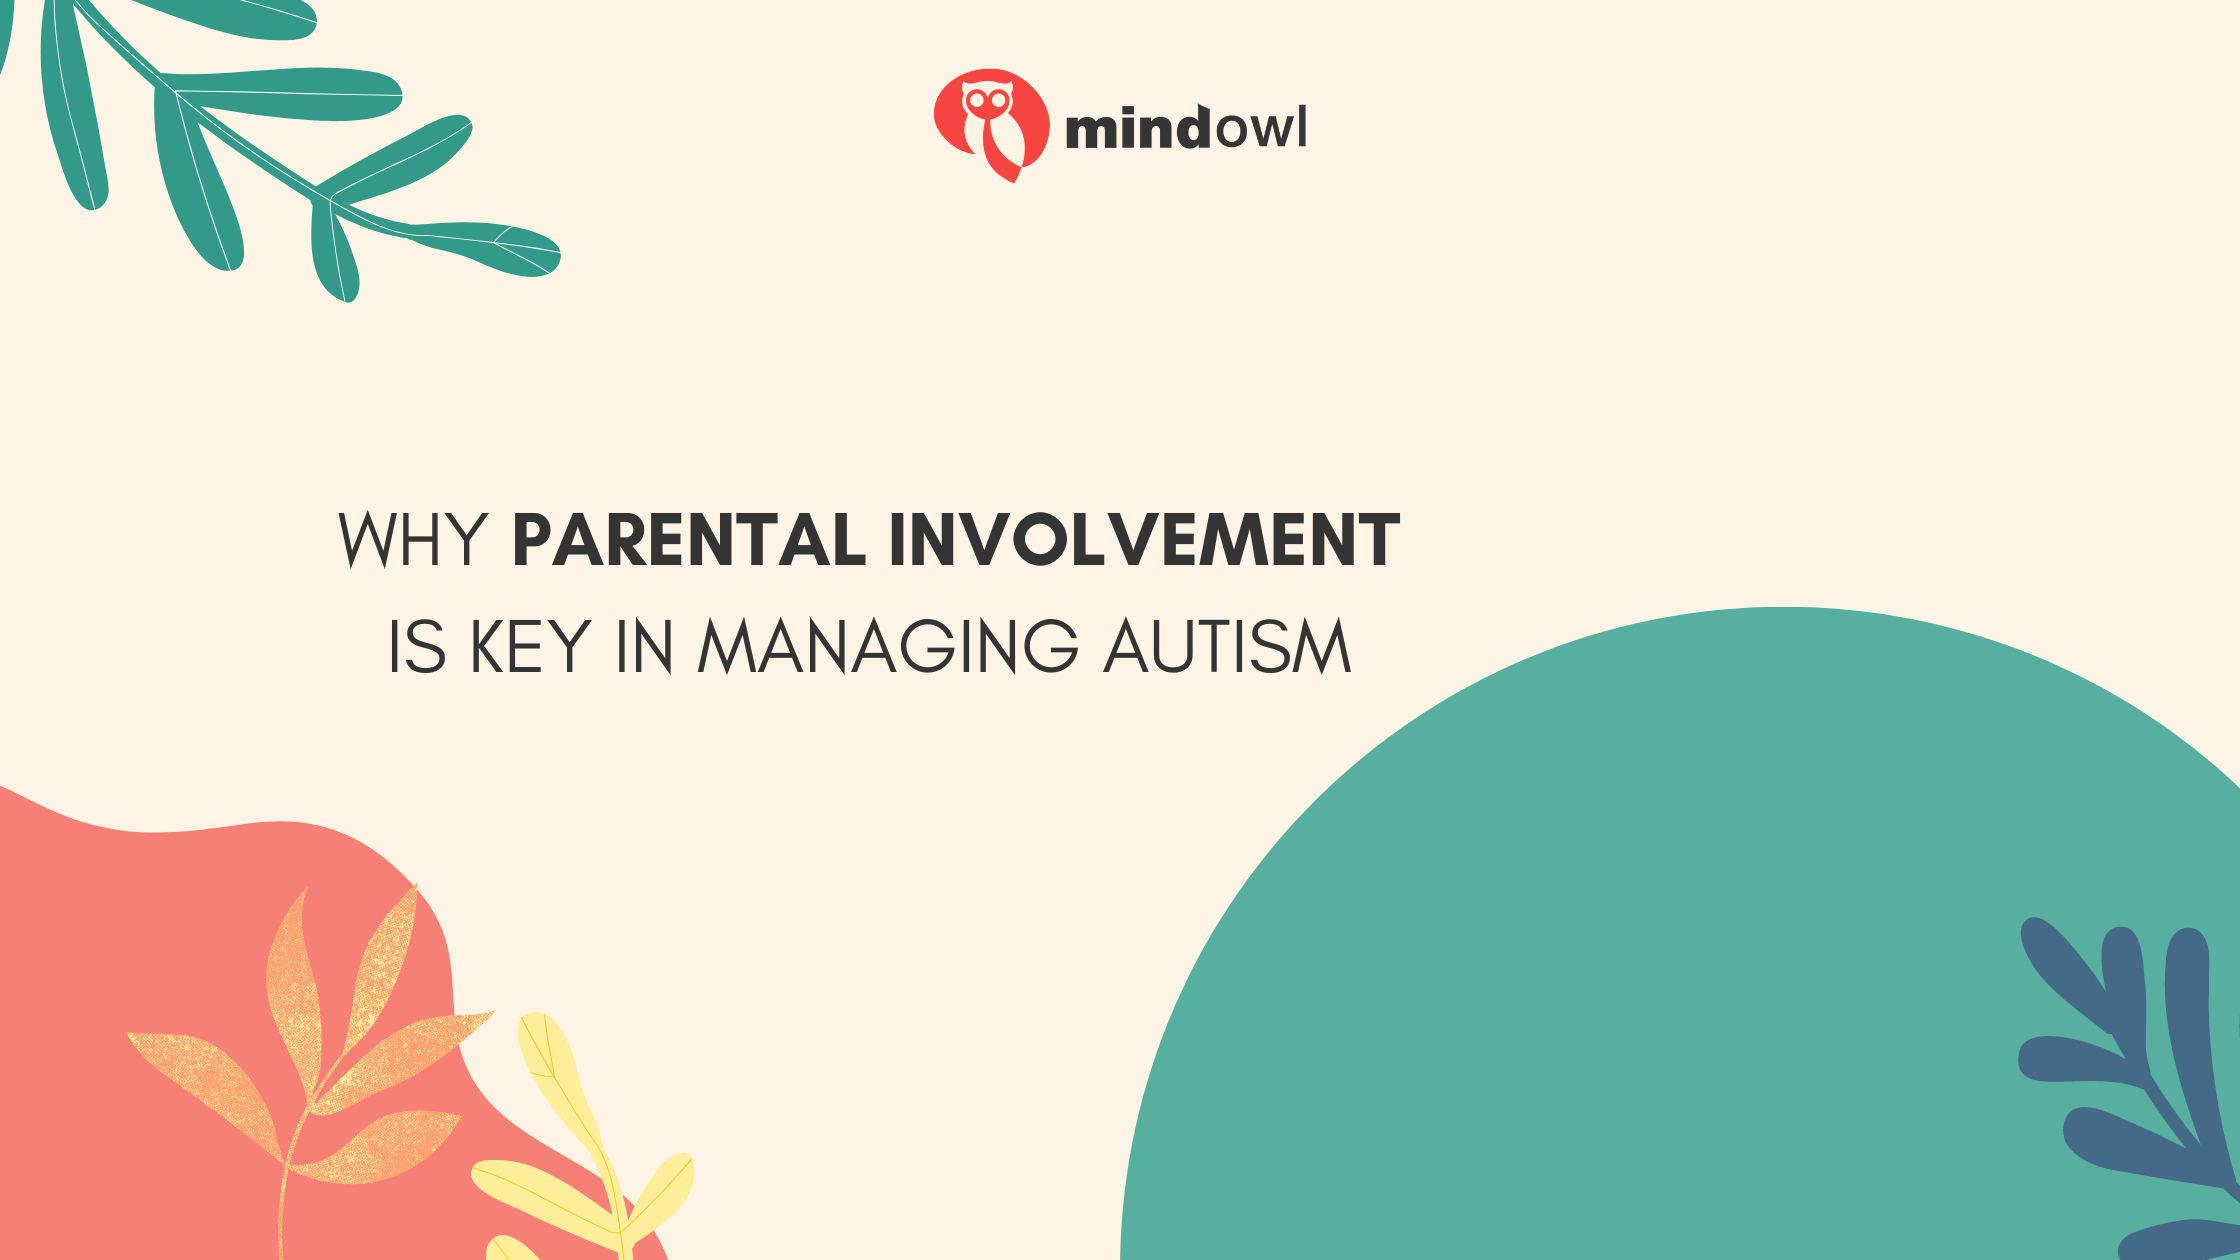 Why Parental Involvement is Key in Managing Autism